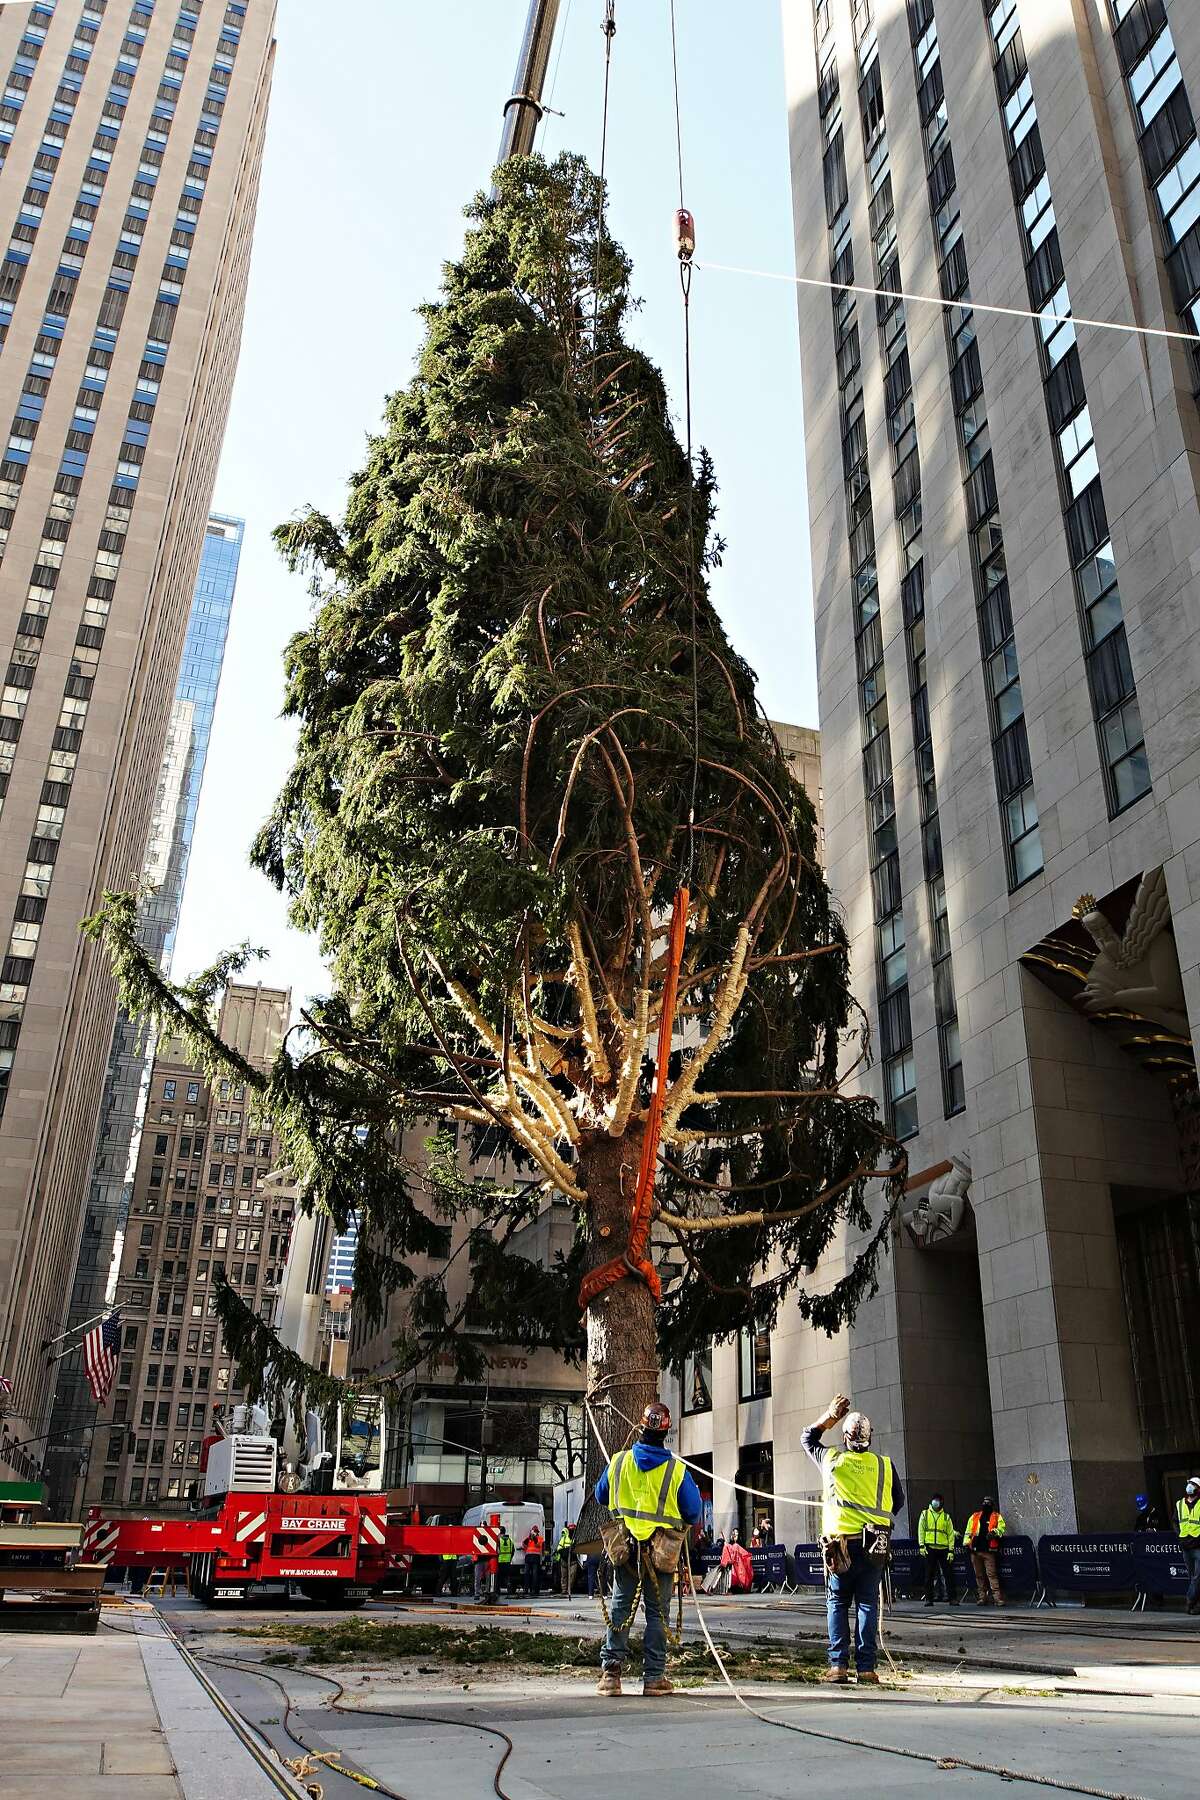 NEW YORK, NEW YORK - NOVEMBER 14: The Rockefeller Center Christmas Tree arrives at Rockefeller Plaza and is craned into place on November 14, 2020 in New York City. (Photo by Cindy Ord/Getty Images)